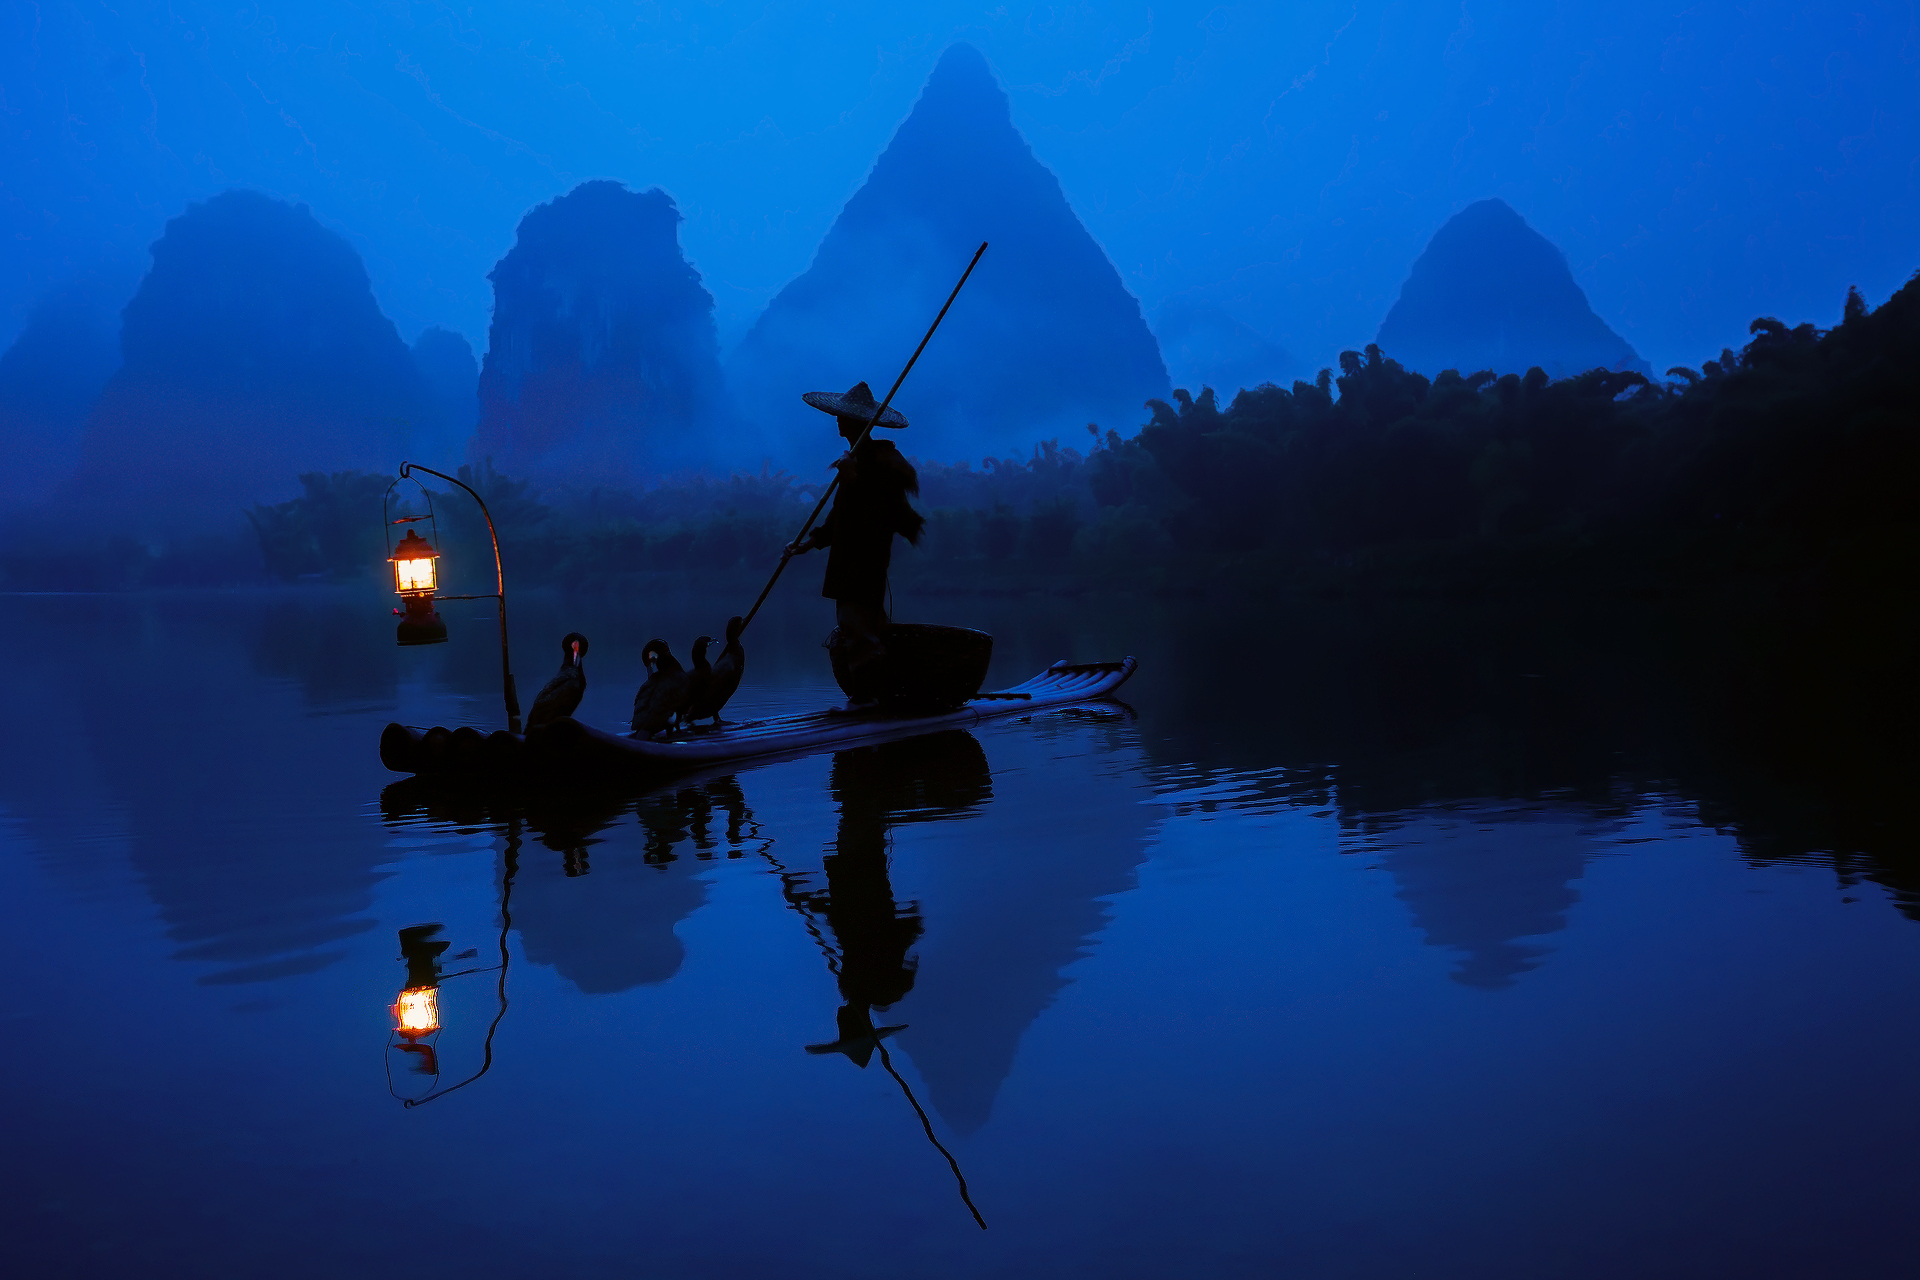 asia, boats, landscape, people, rivers, pictures, blue